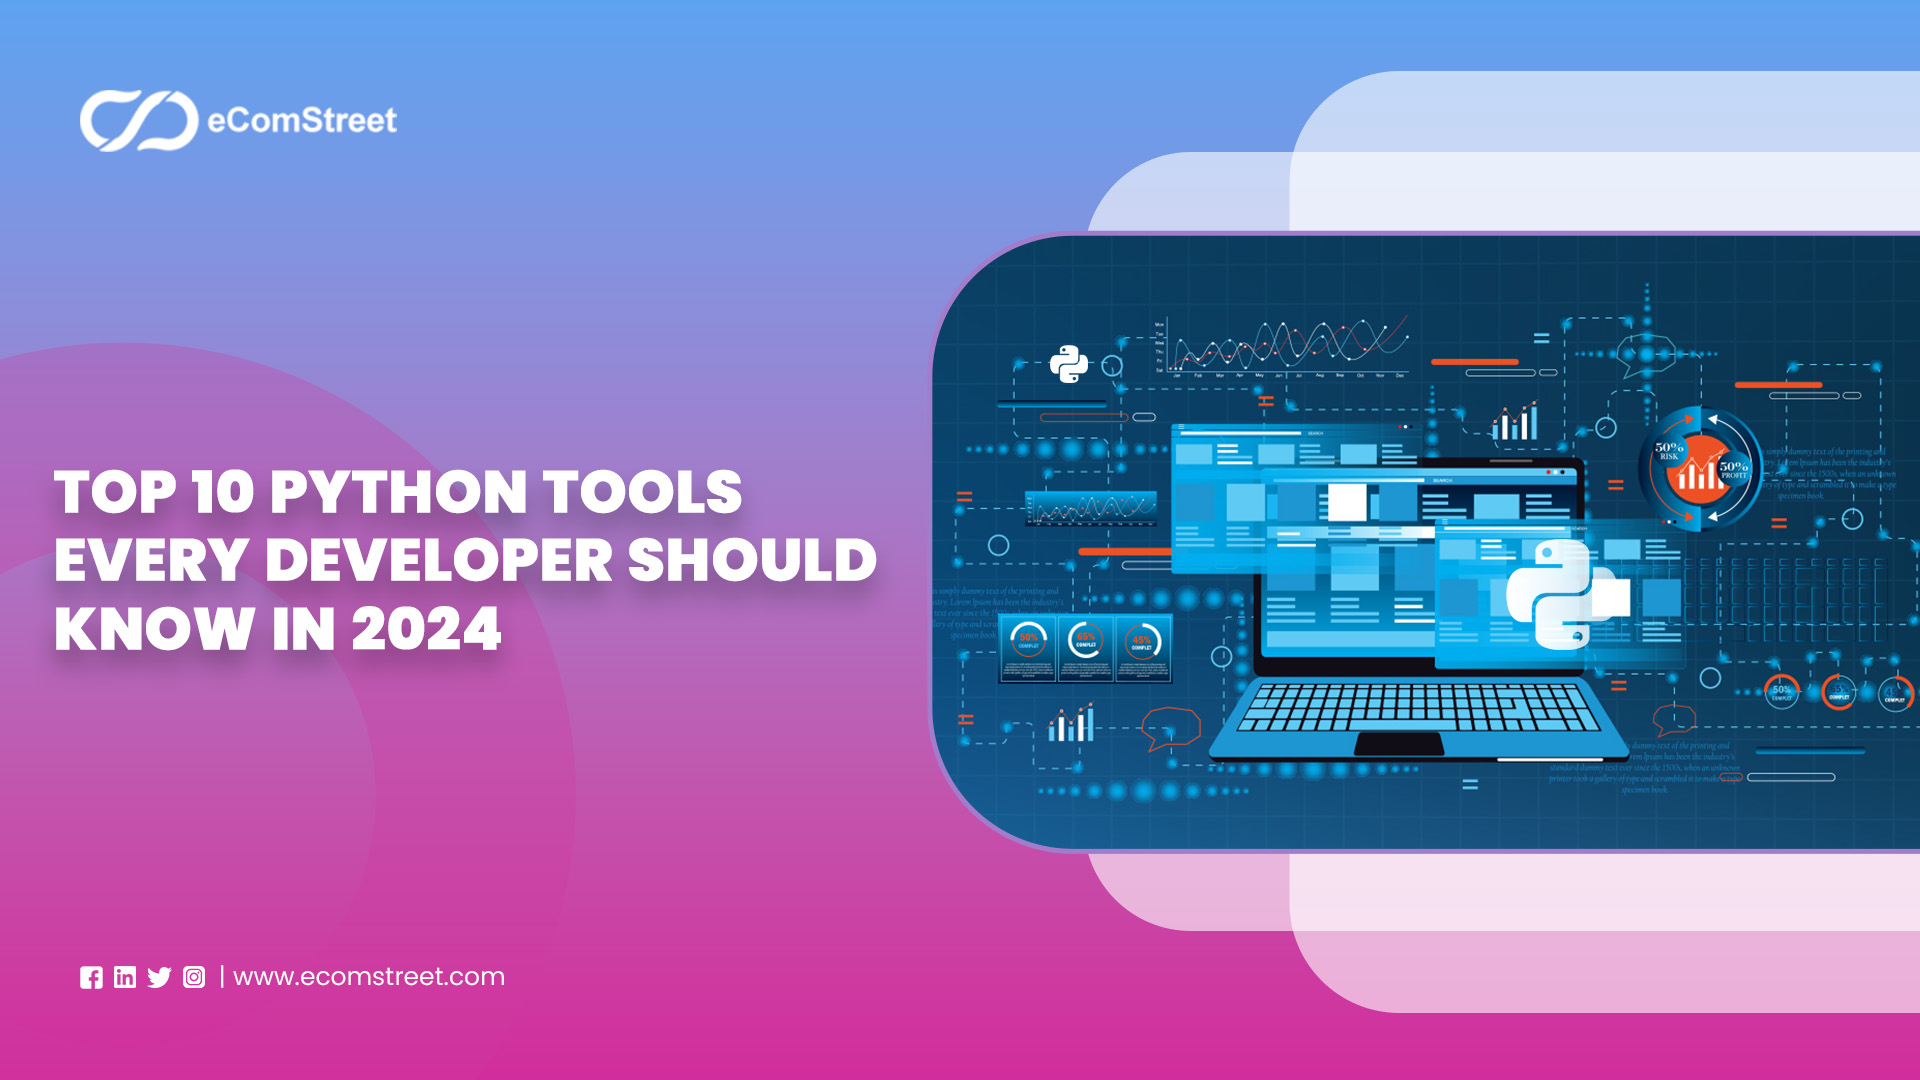 Top 10 Python Tools Every Developer Should Know in 2024